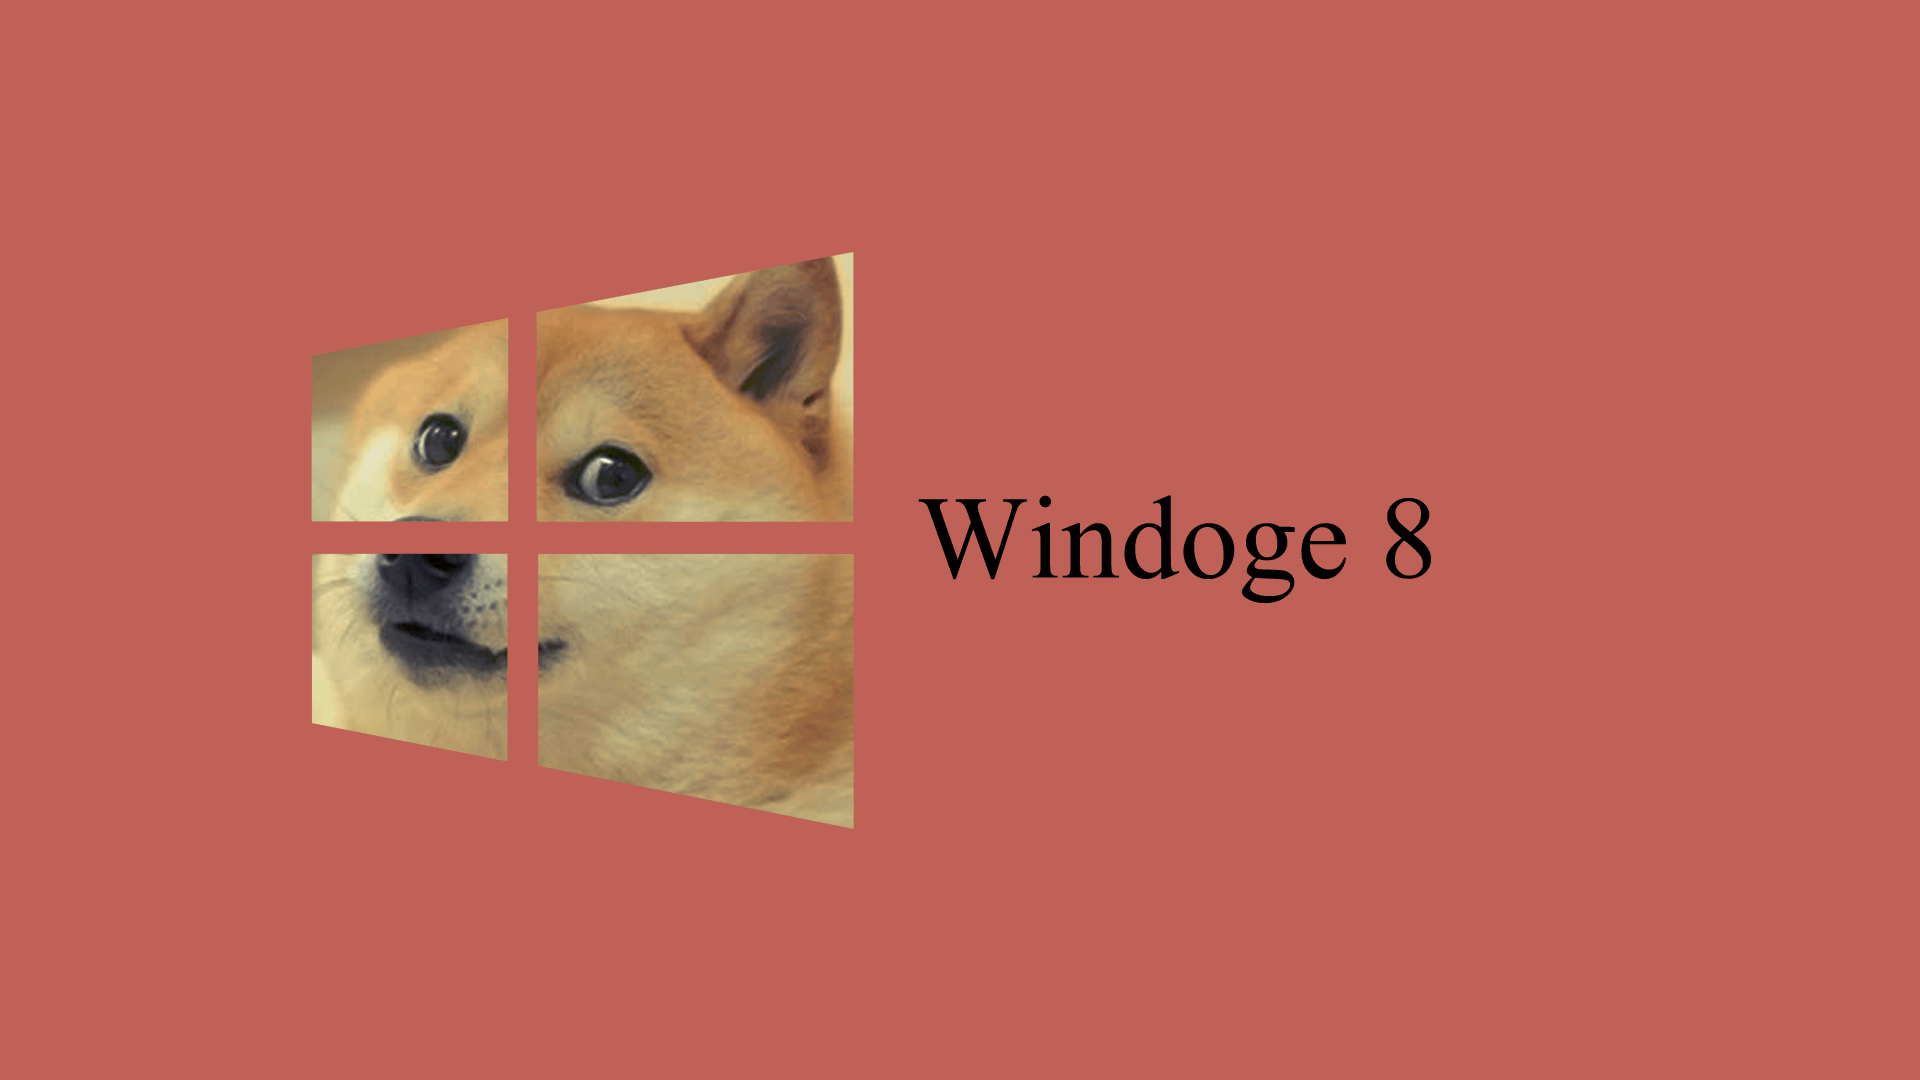 I made a few Windoge 8 wallpaper because who wouldn't want a variety of colors?